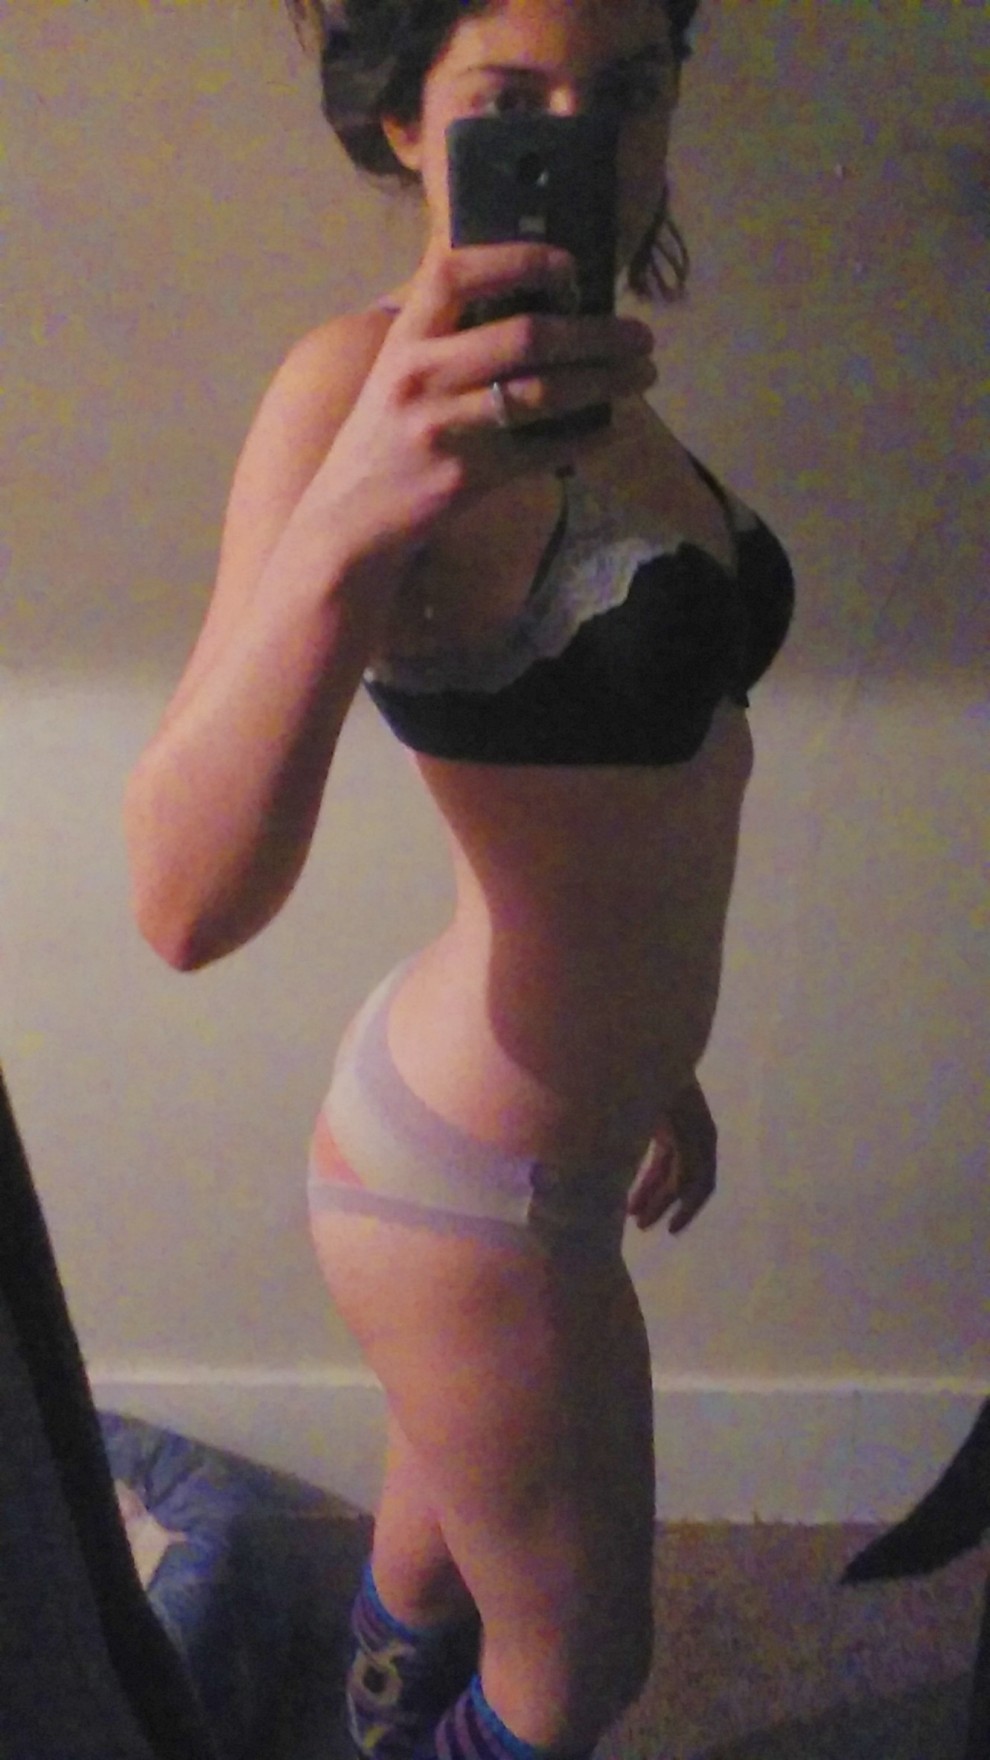 [F] Getting ready to grab a couple drinks